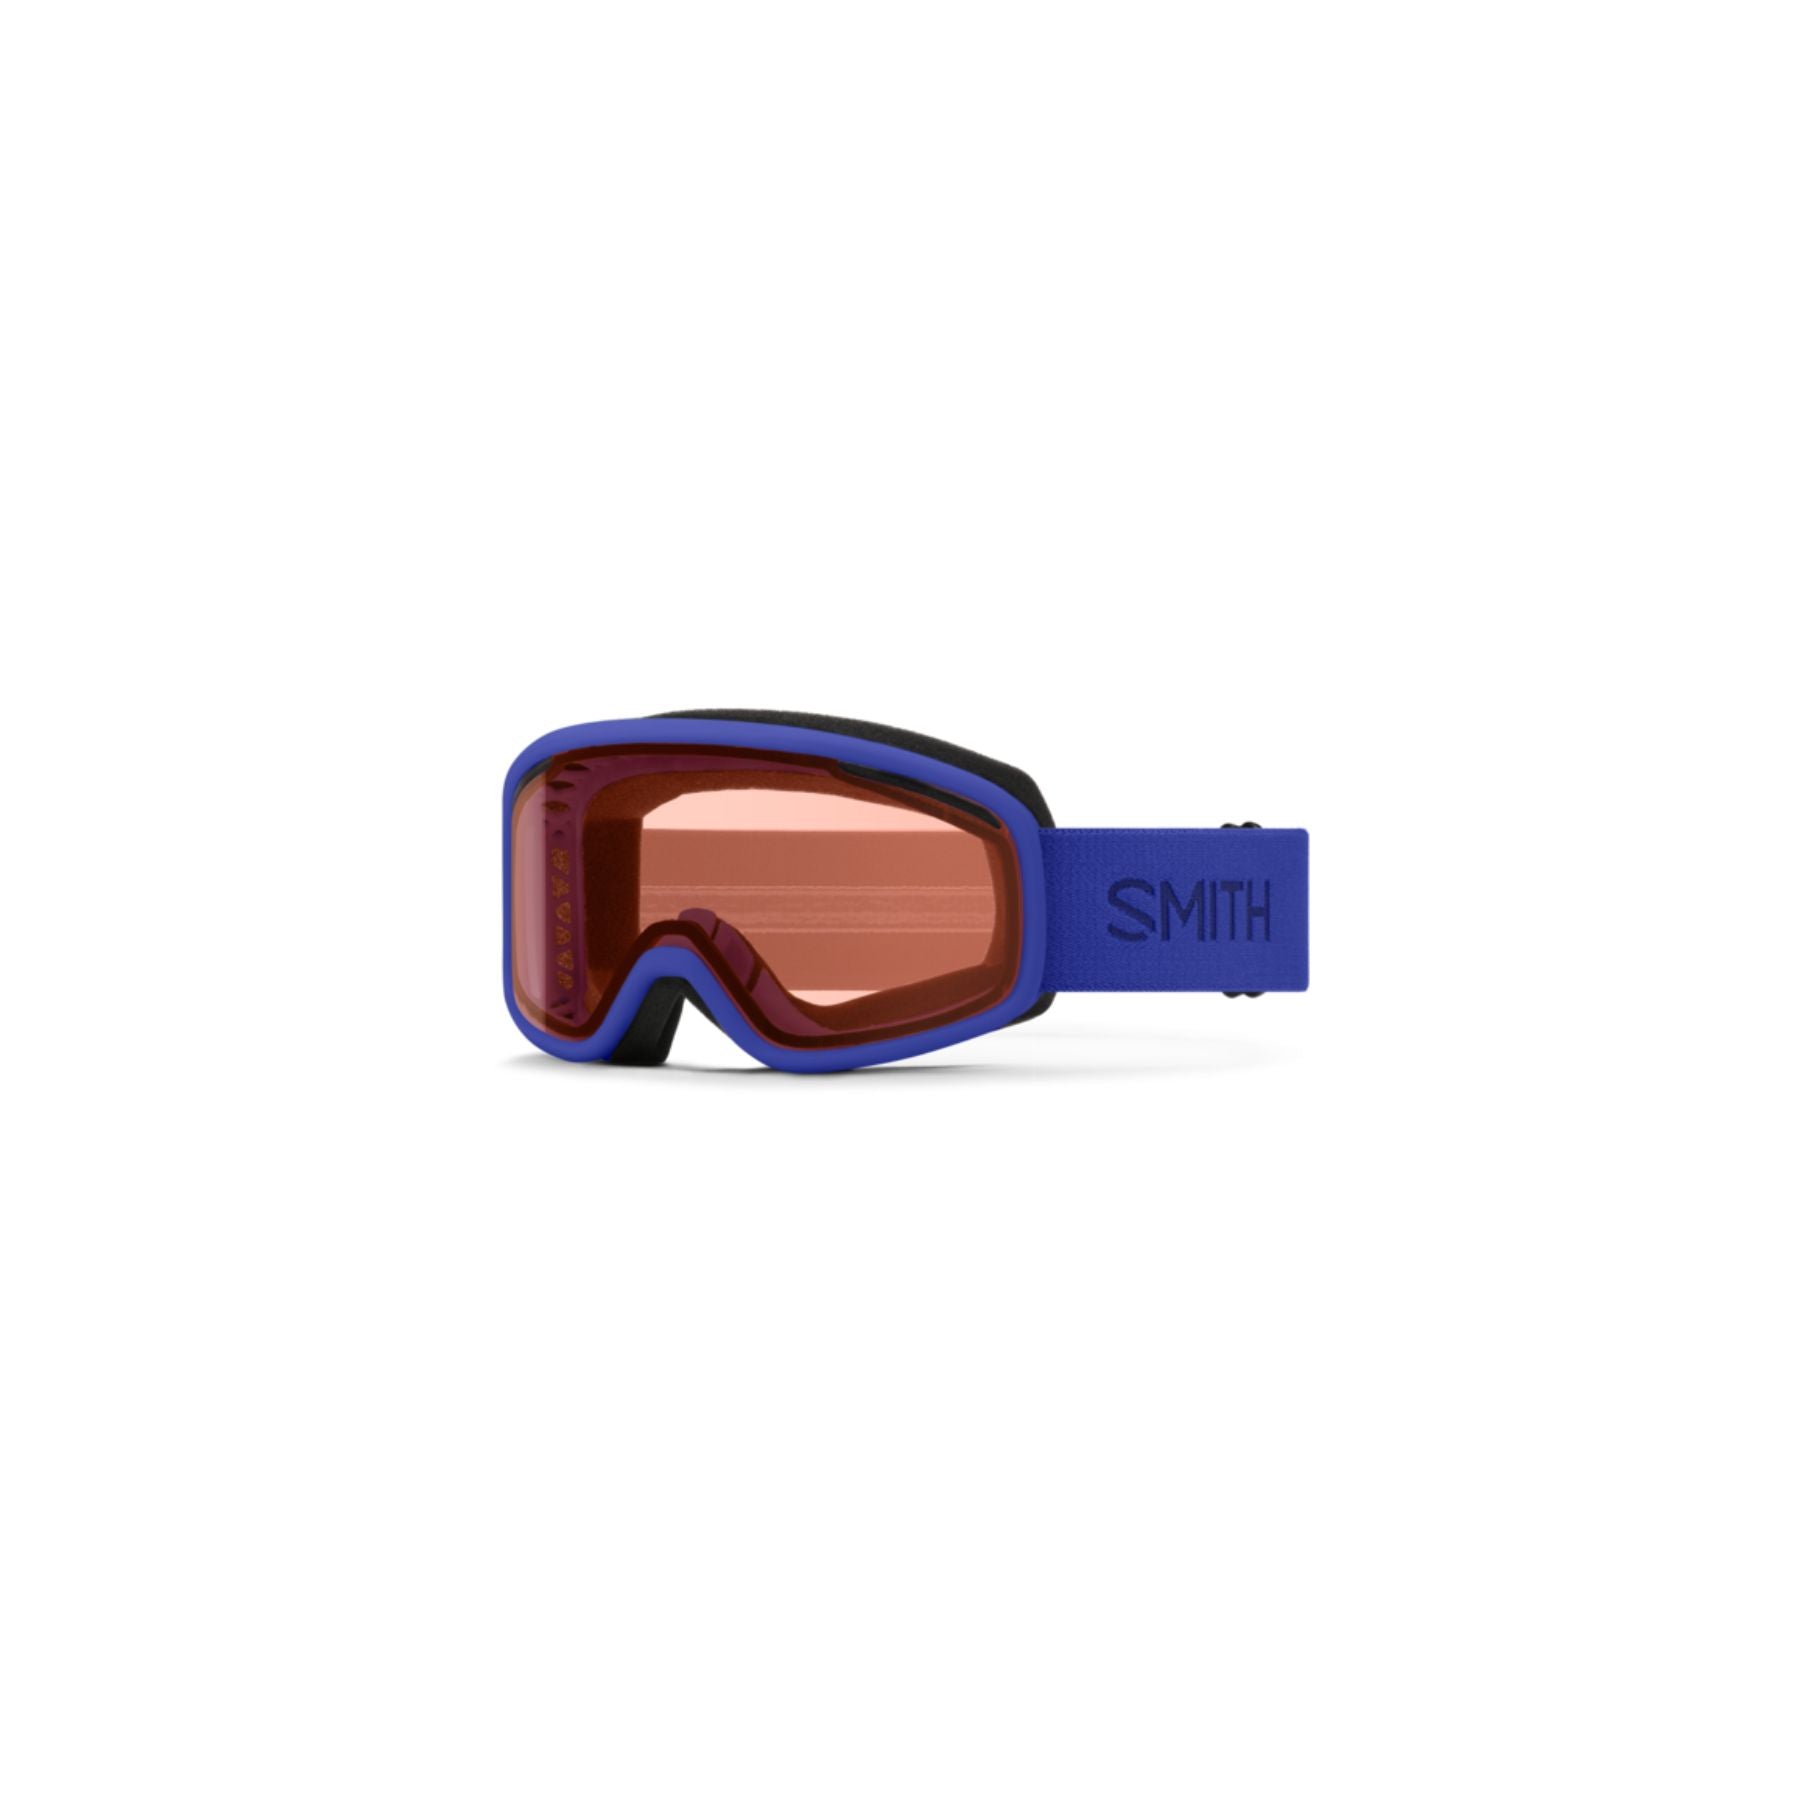 Smith Vogue Goggles in Lapis